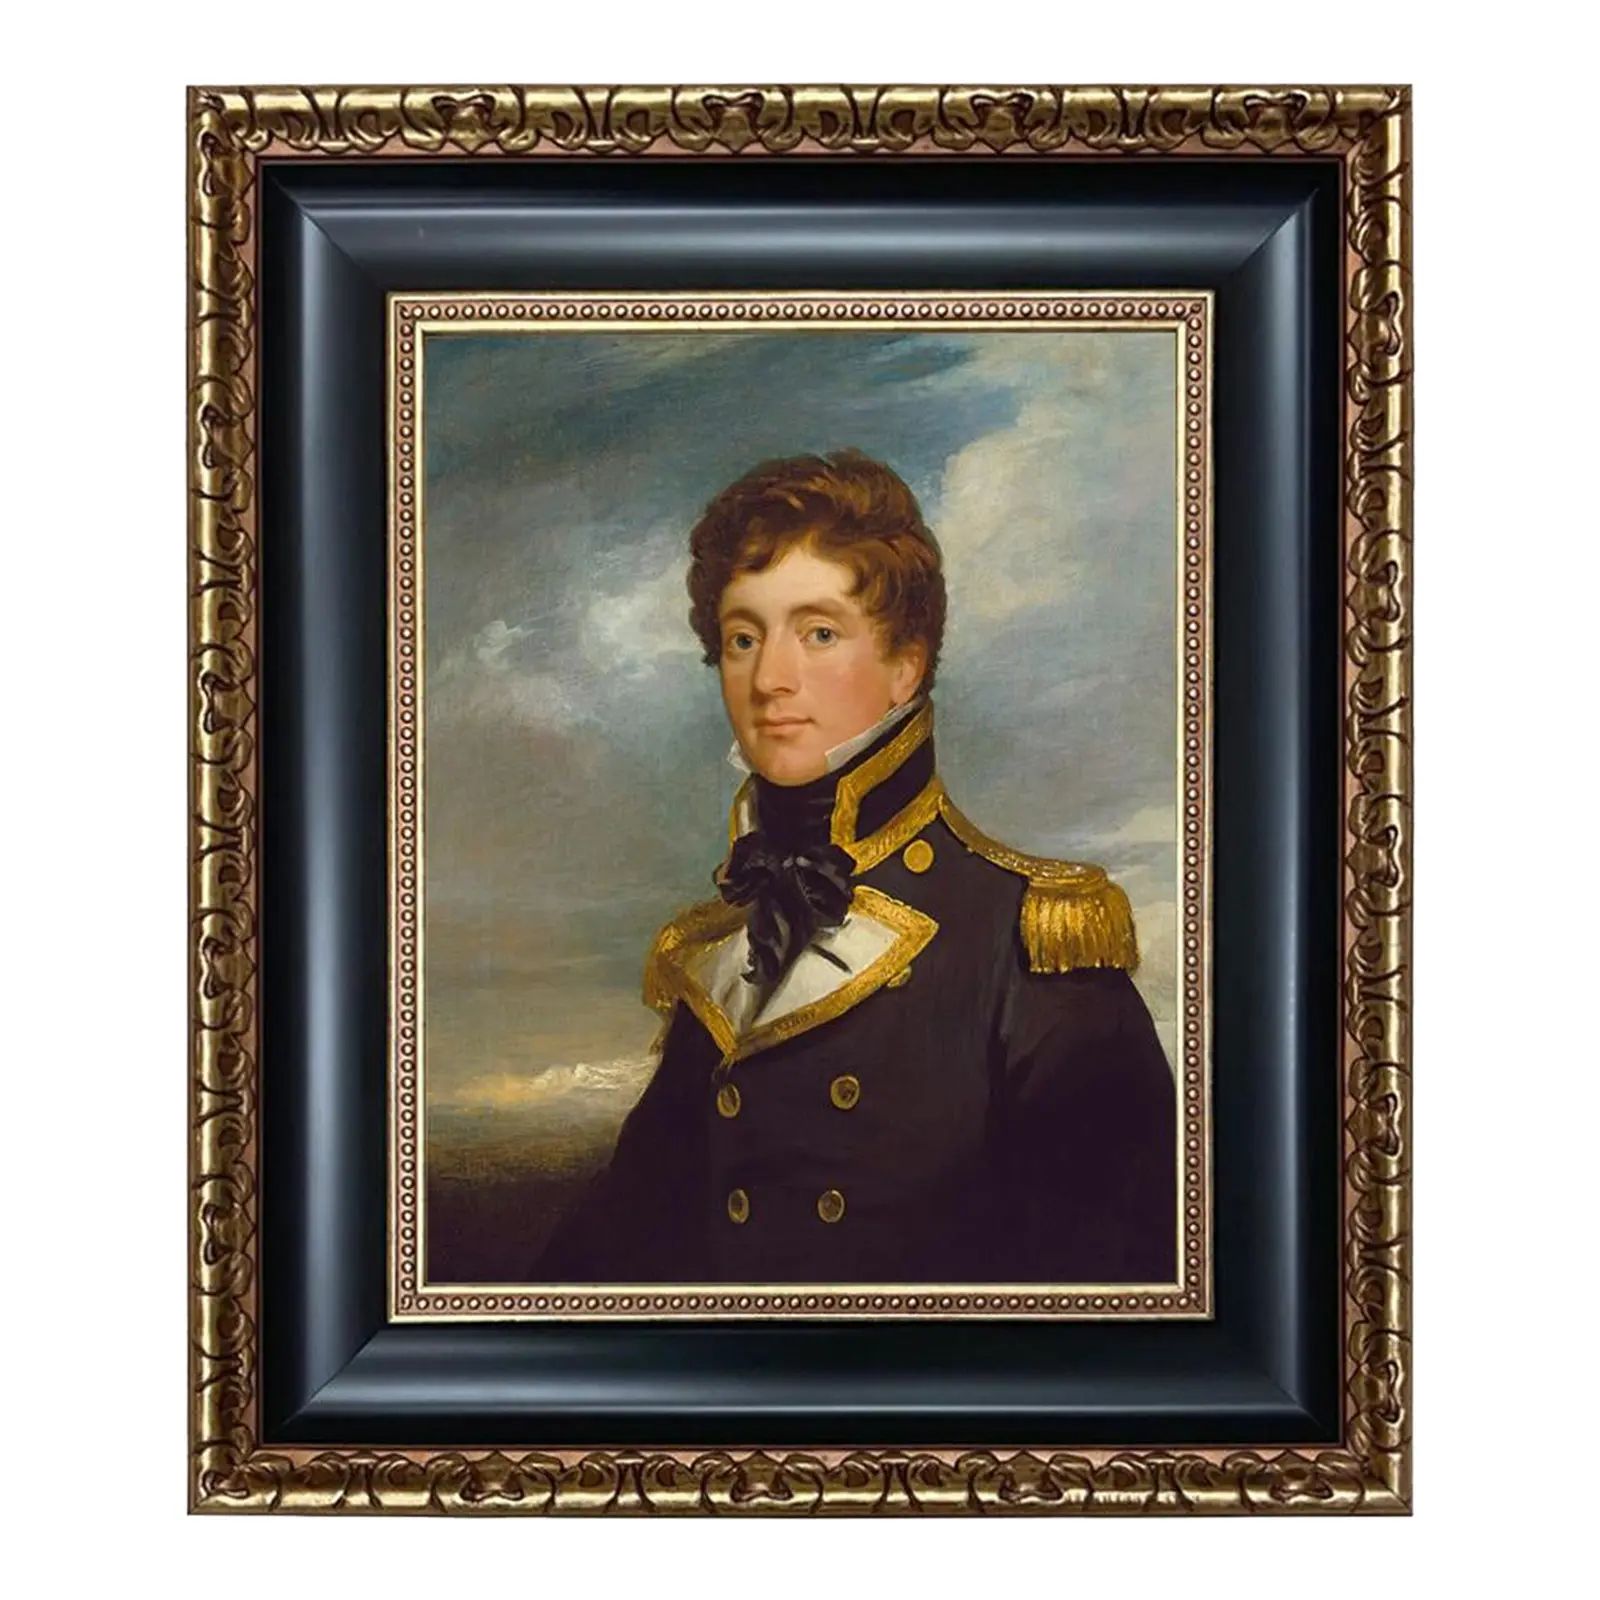 "English Naval Officer" Contemporary Reproduction Portrait Print on Canvas, Framed | Chairish